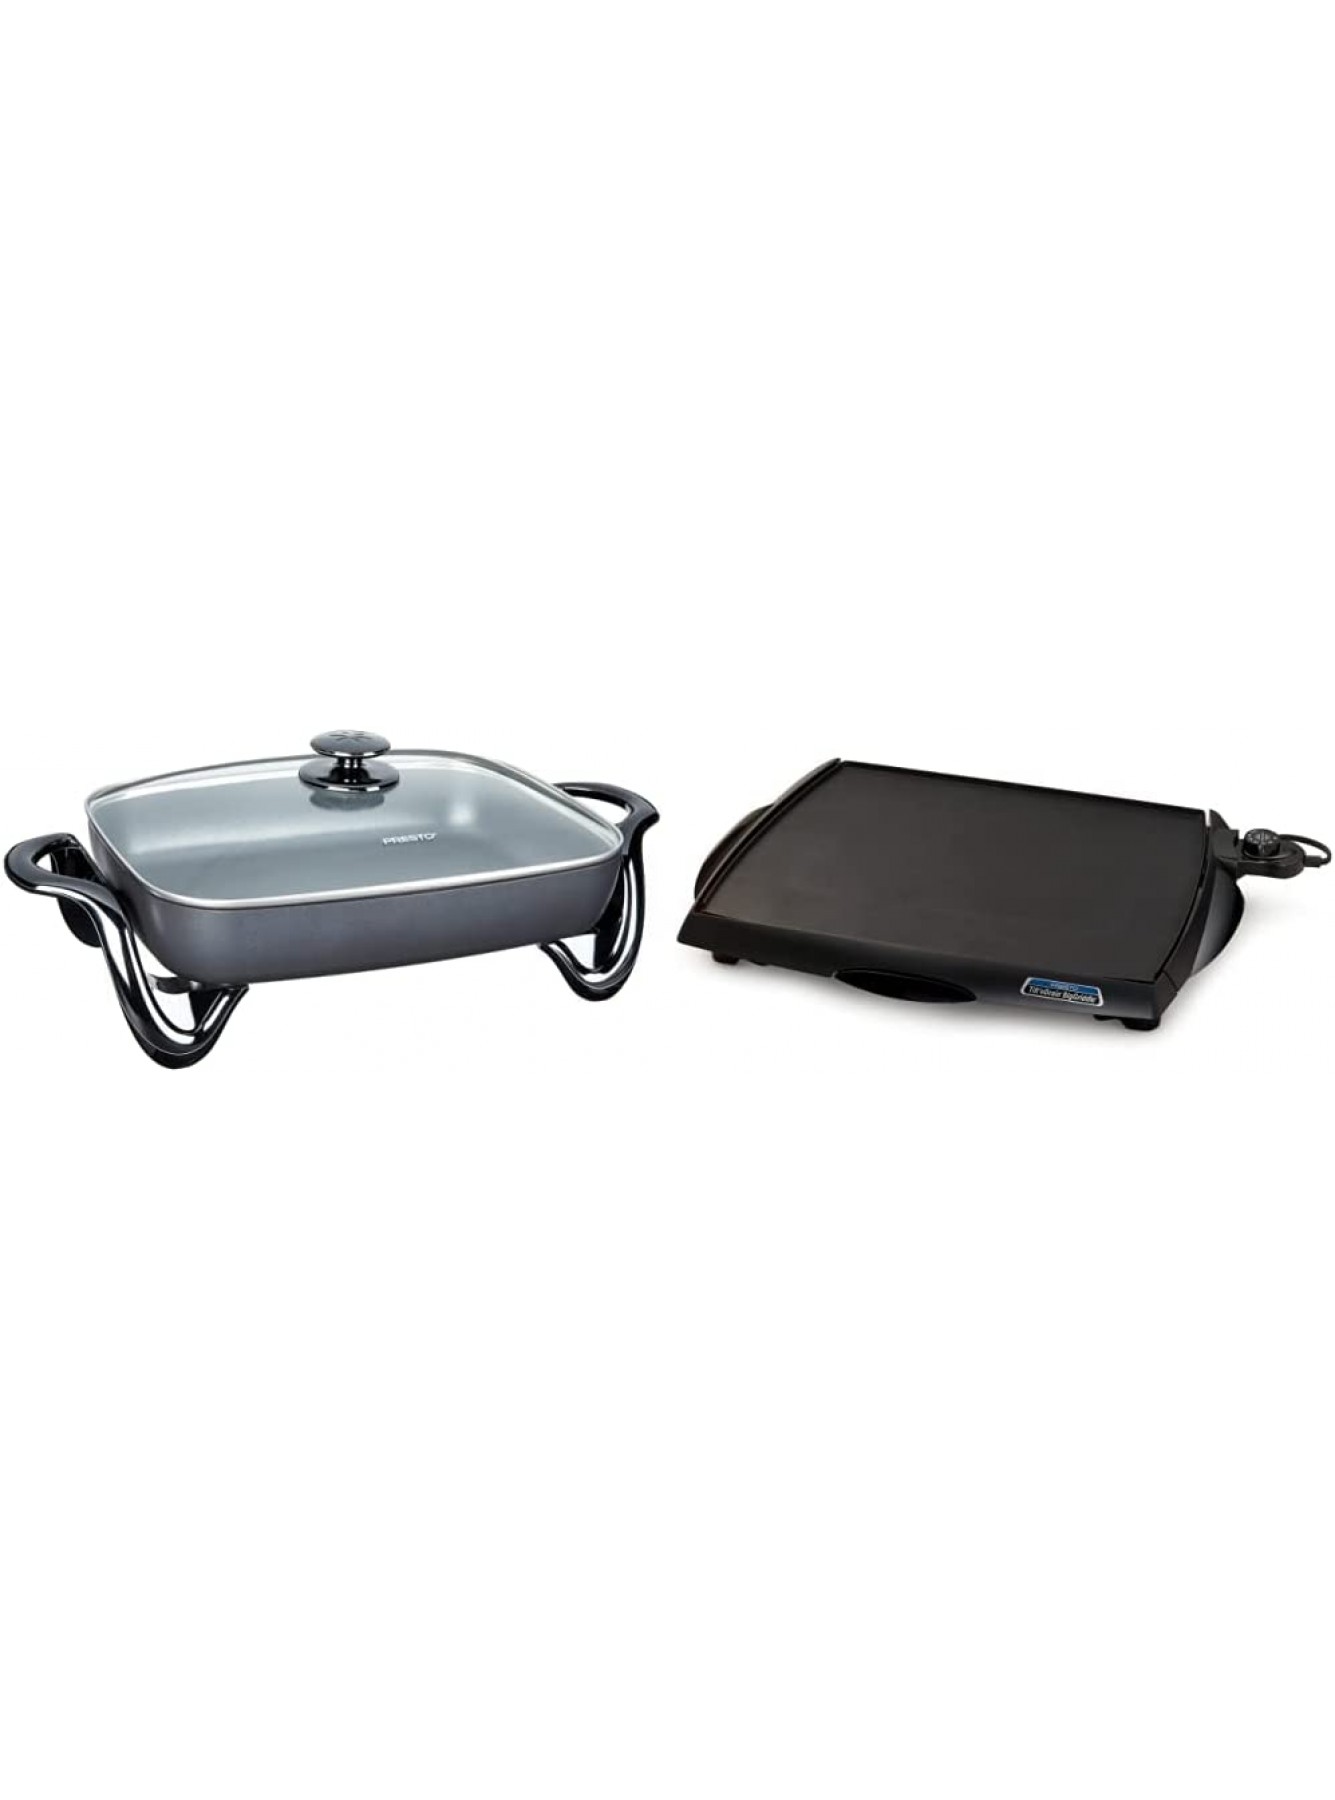 Presto 06852 16-Inch Electric Skillet with Glass Cover & Presto 07046 Tilt 'n Drain Big Griddle Cool-Touch Electric Griddle B09T6W9NHW